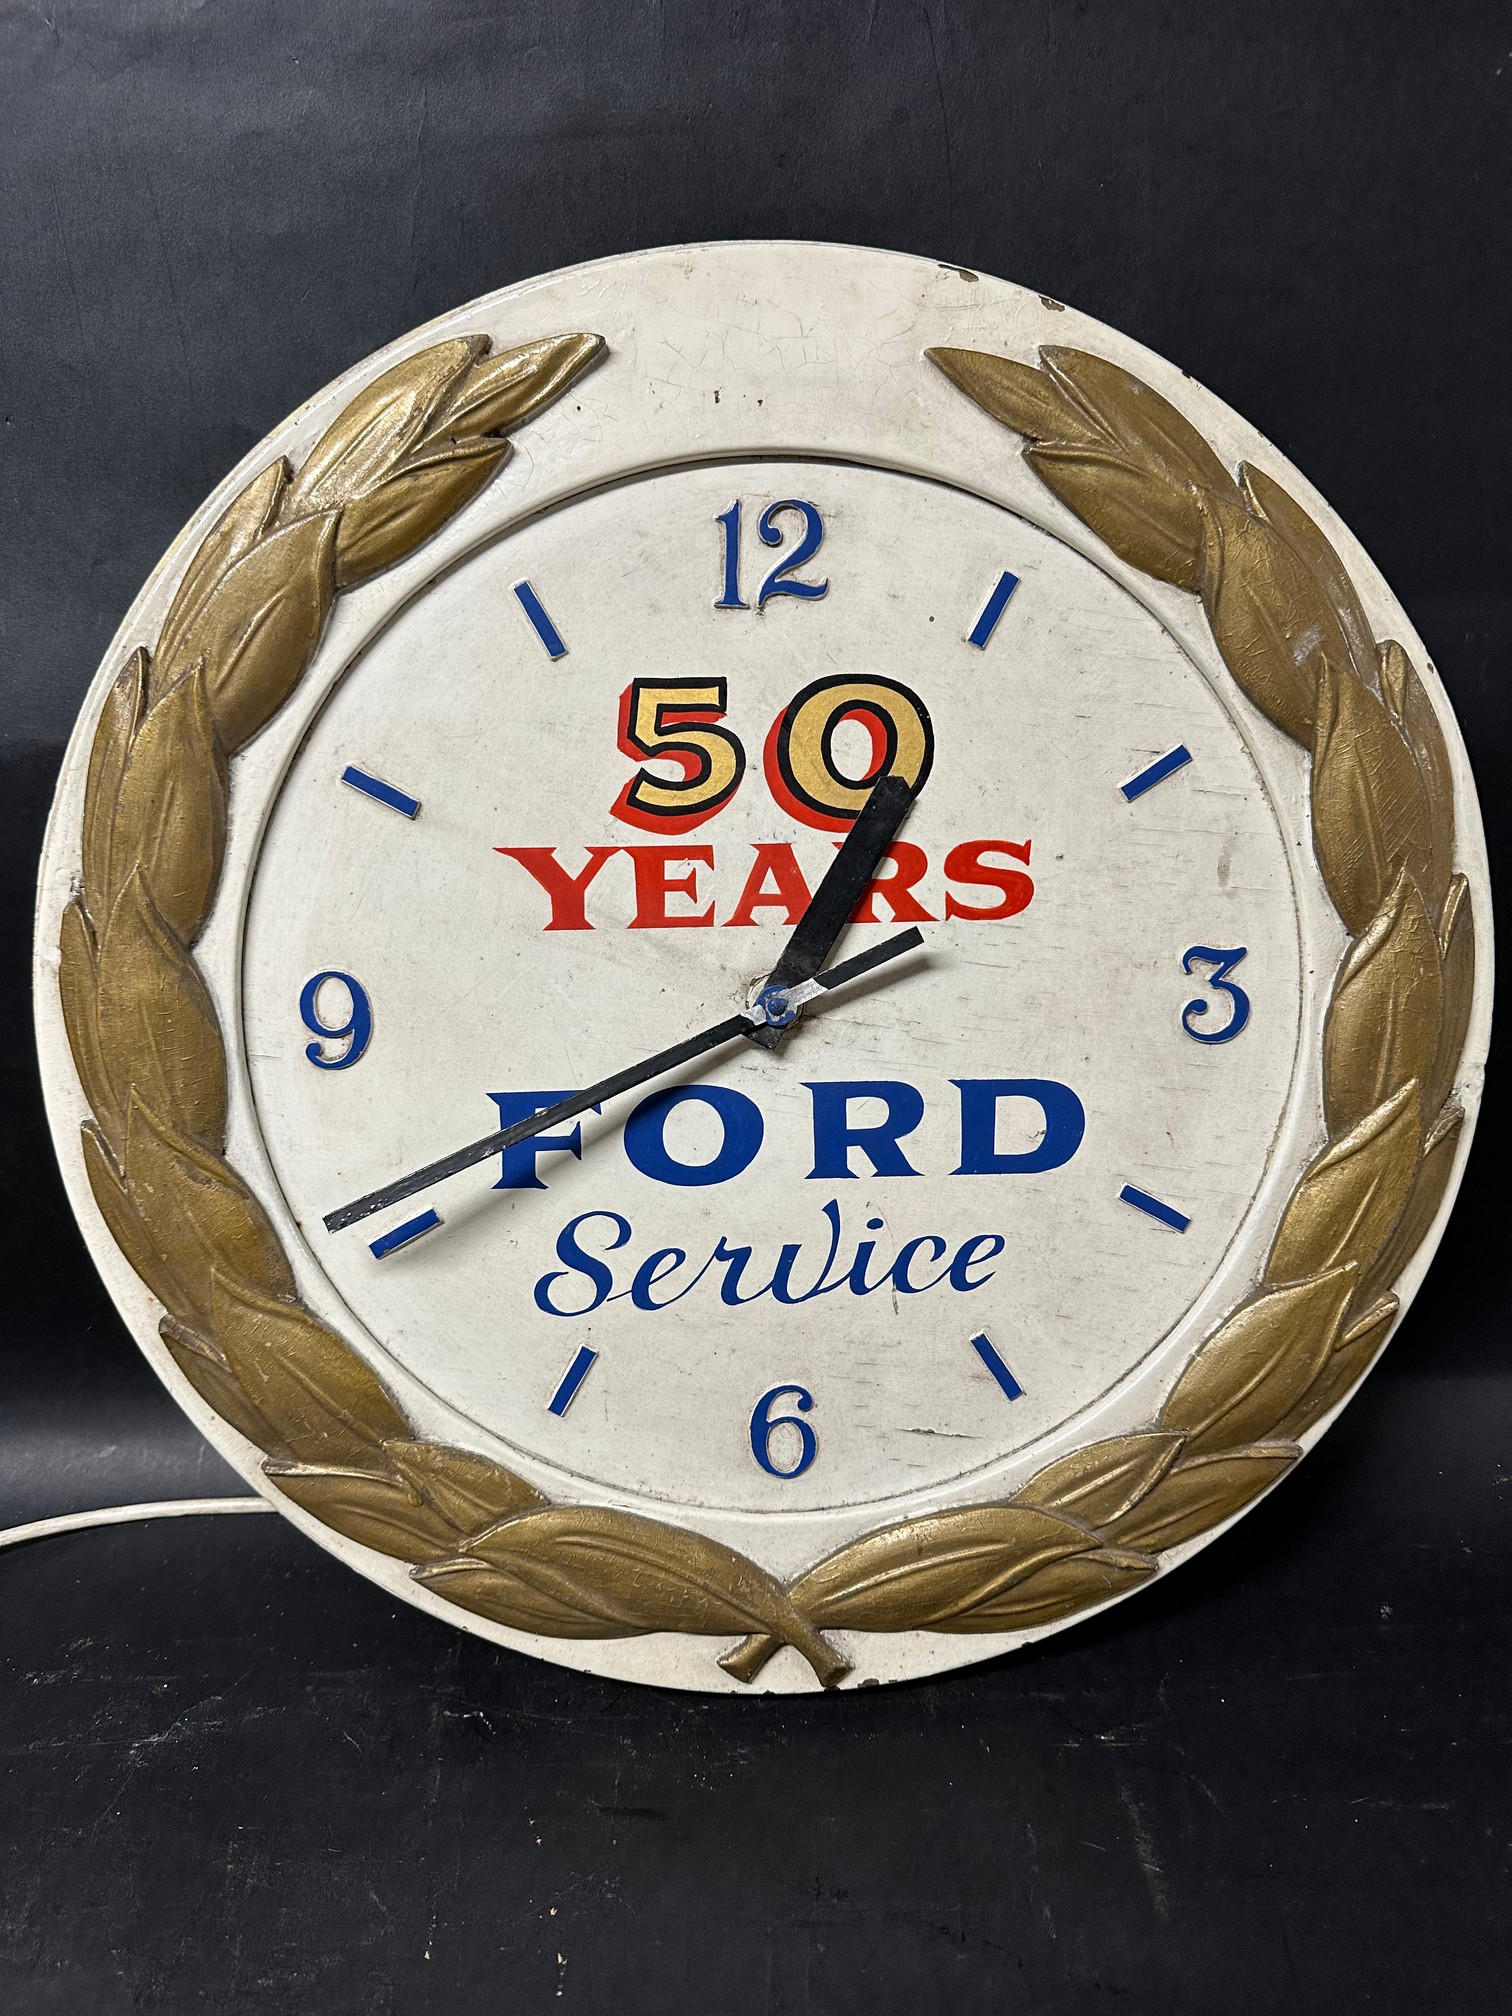 A Ford 50 years of service wooden wall clock presented to dealers for long service, 20 1/2"